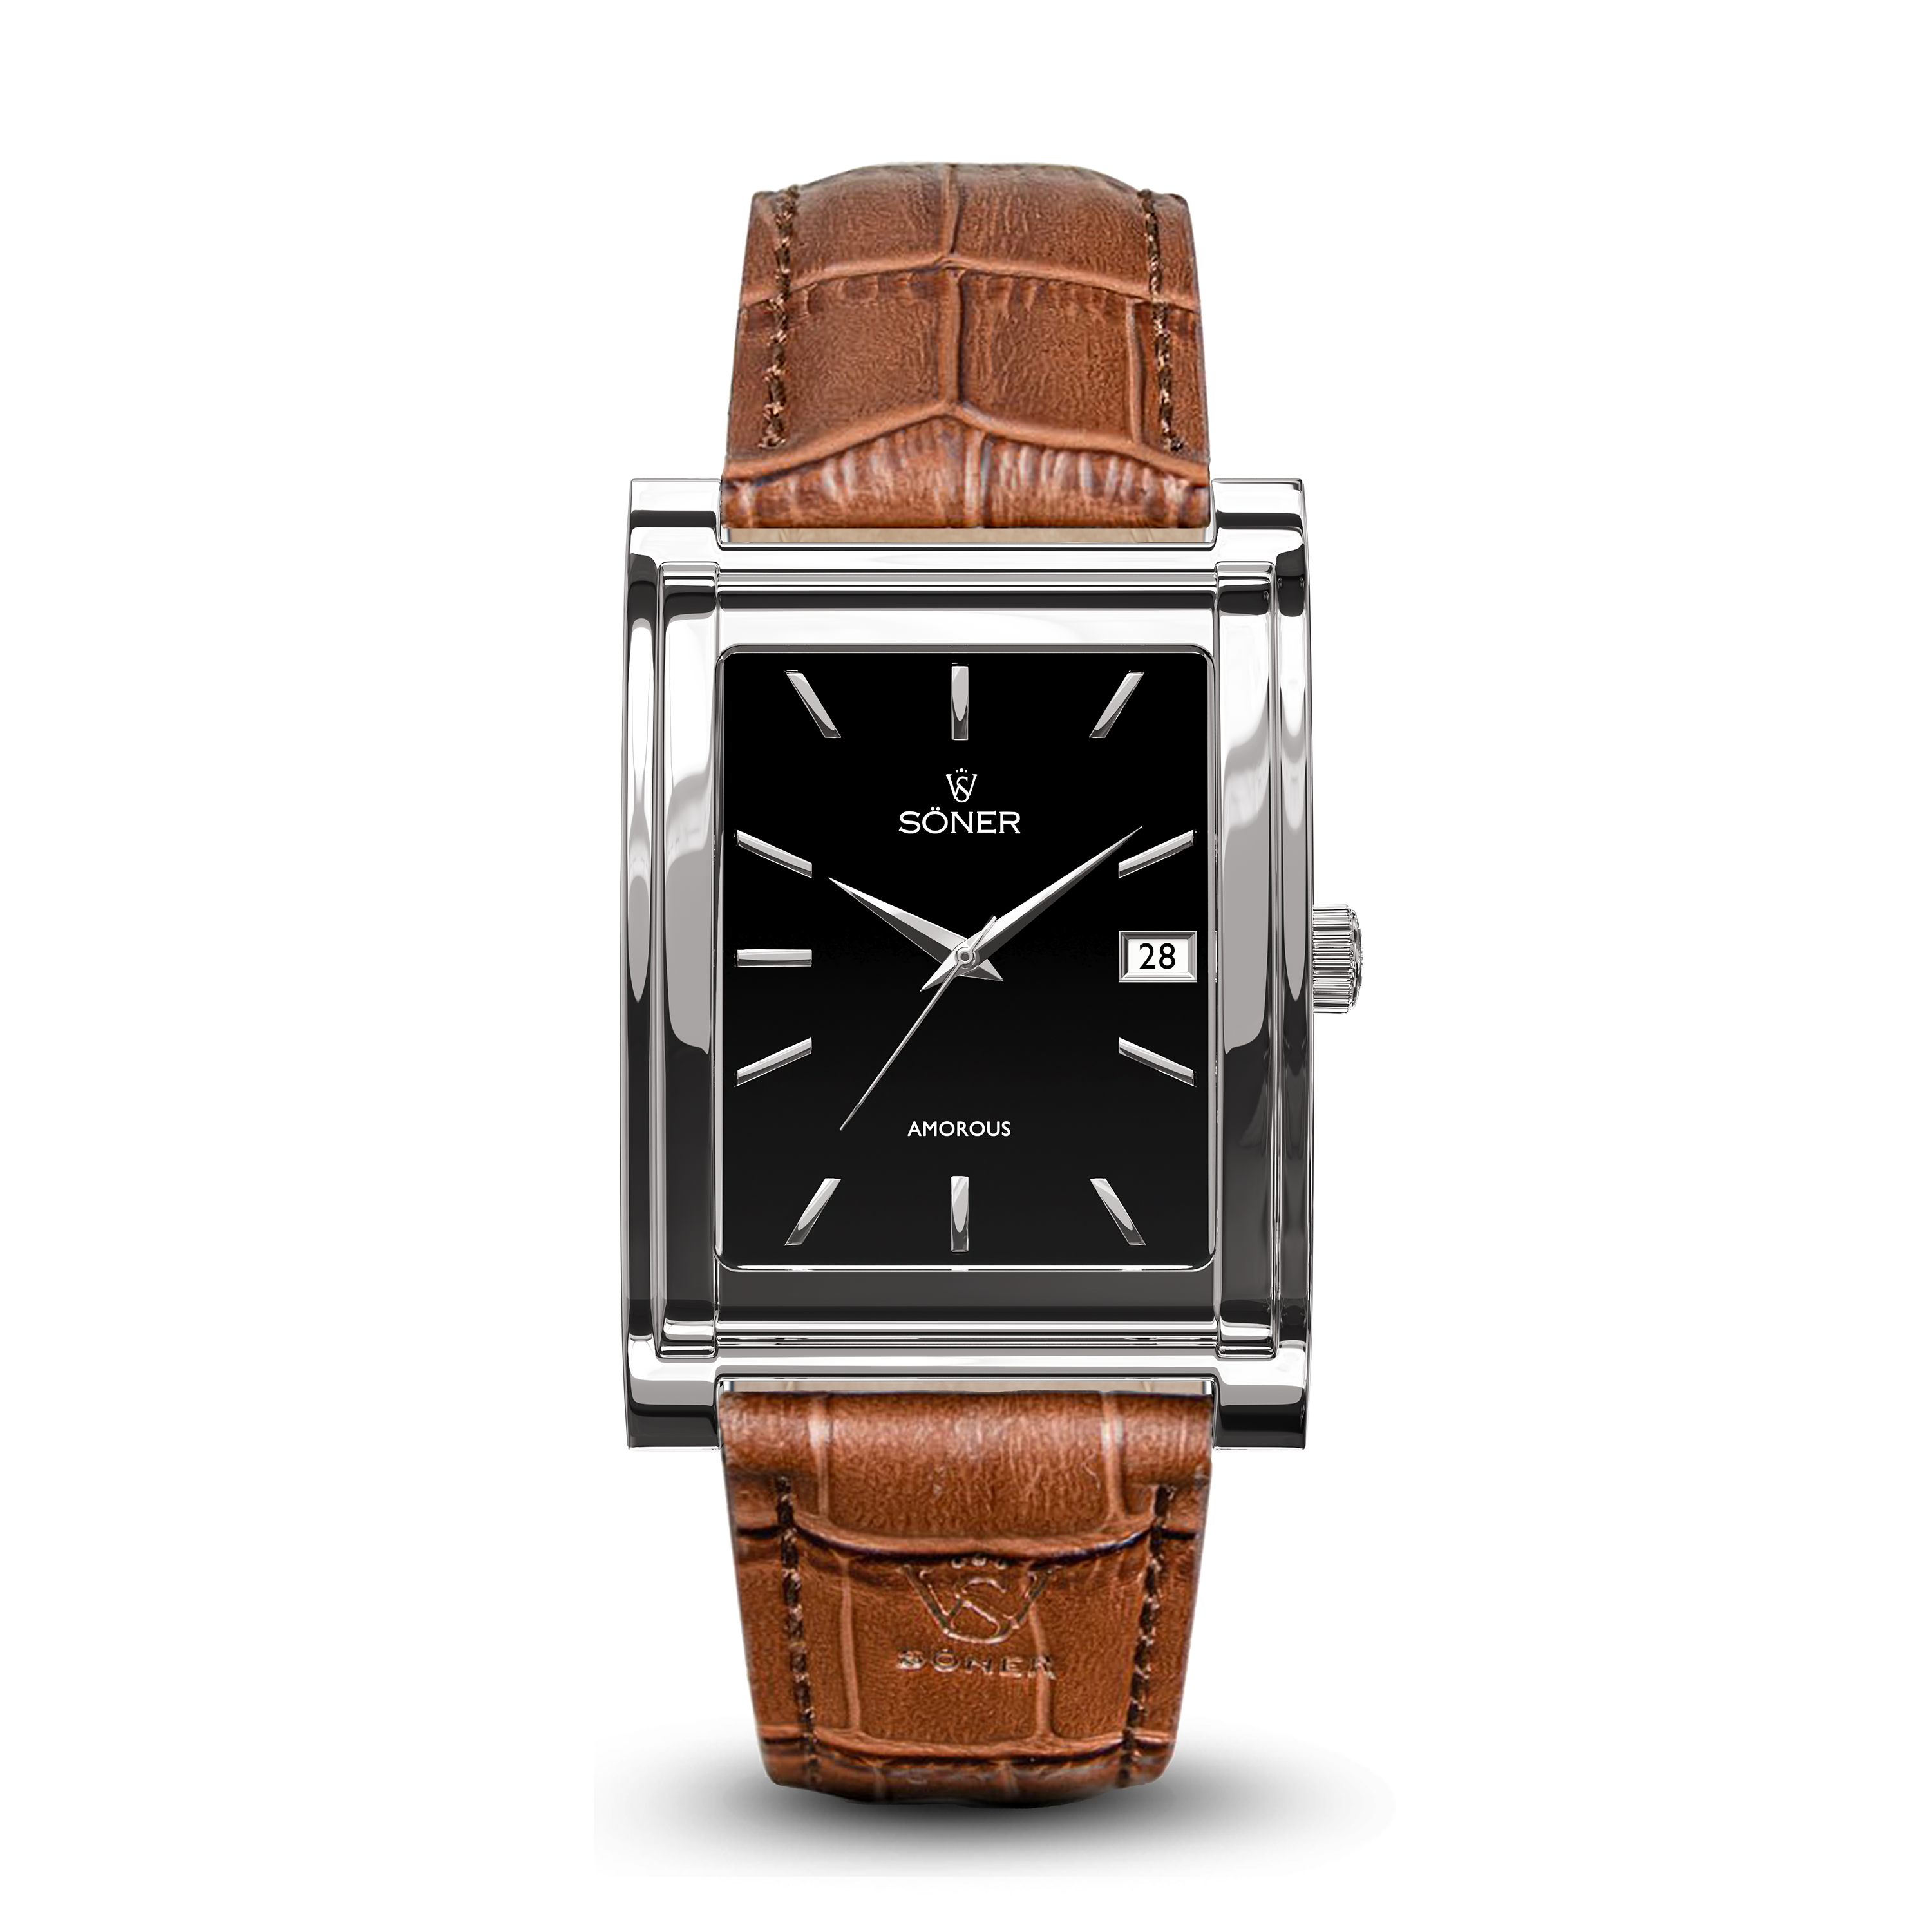 Square automatic watch, Amorous Barcelona with black dial - brown alligator pattern leather strap front view